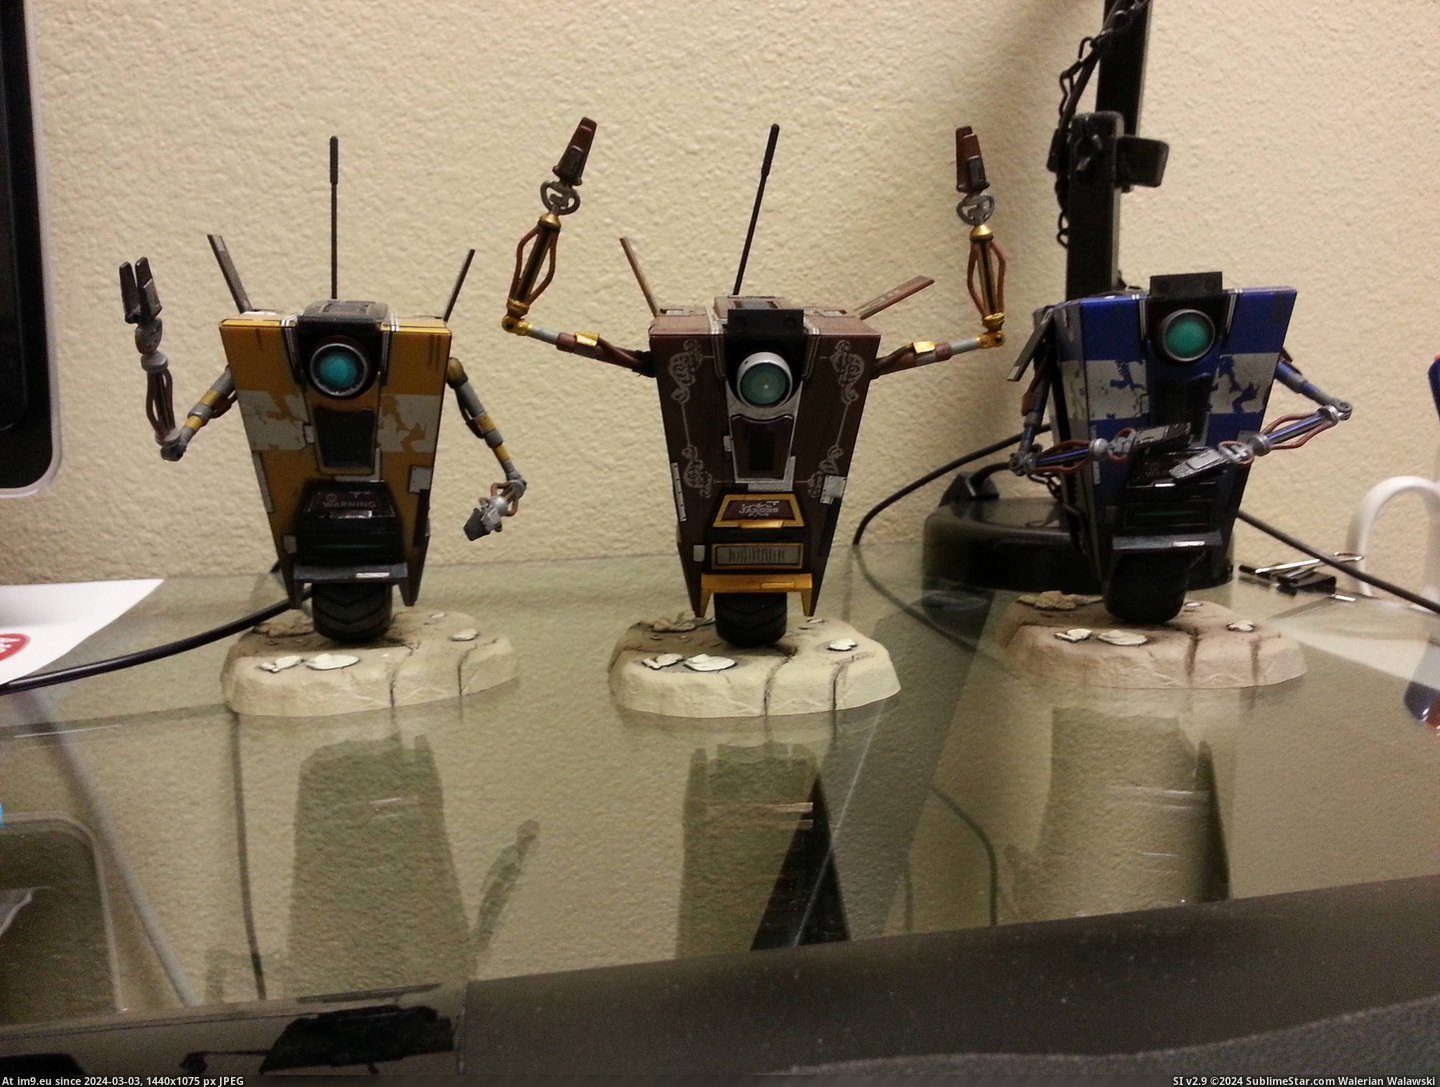 #Funny #Gaming #Robots #Dance #Collecting [Gaming] Been collecting these funny little robots... they like to dance. Pic. (Изображение из альбом My r/GAMING favs))